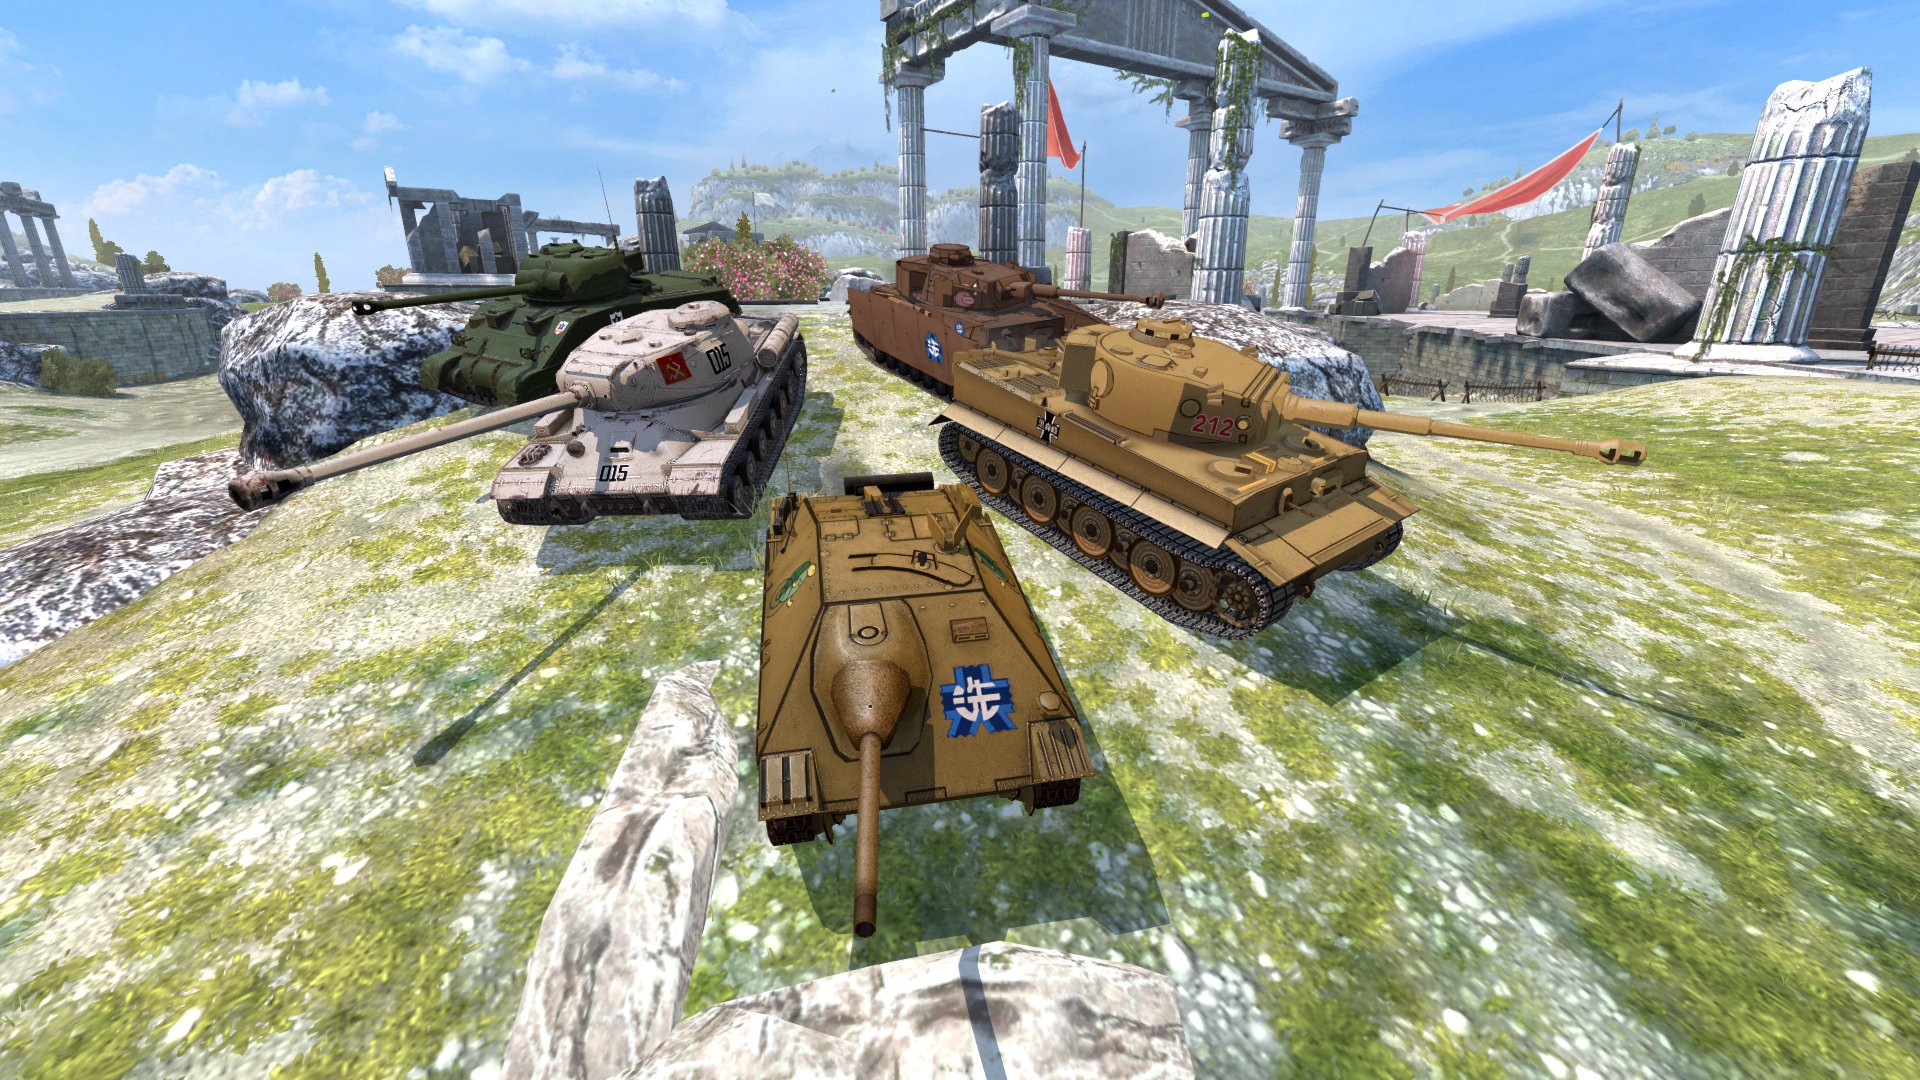 Two New Vehicles From The Girls und Panzer Universe Head for World of Tanks Blitz